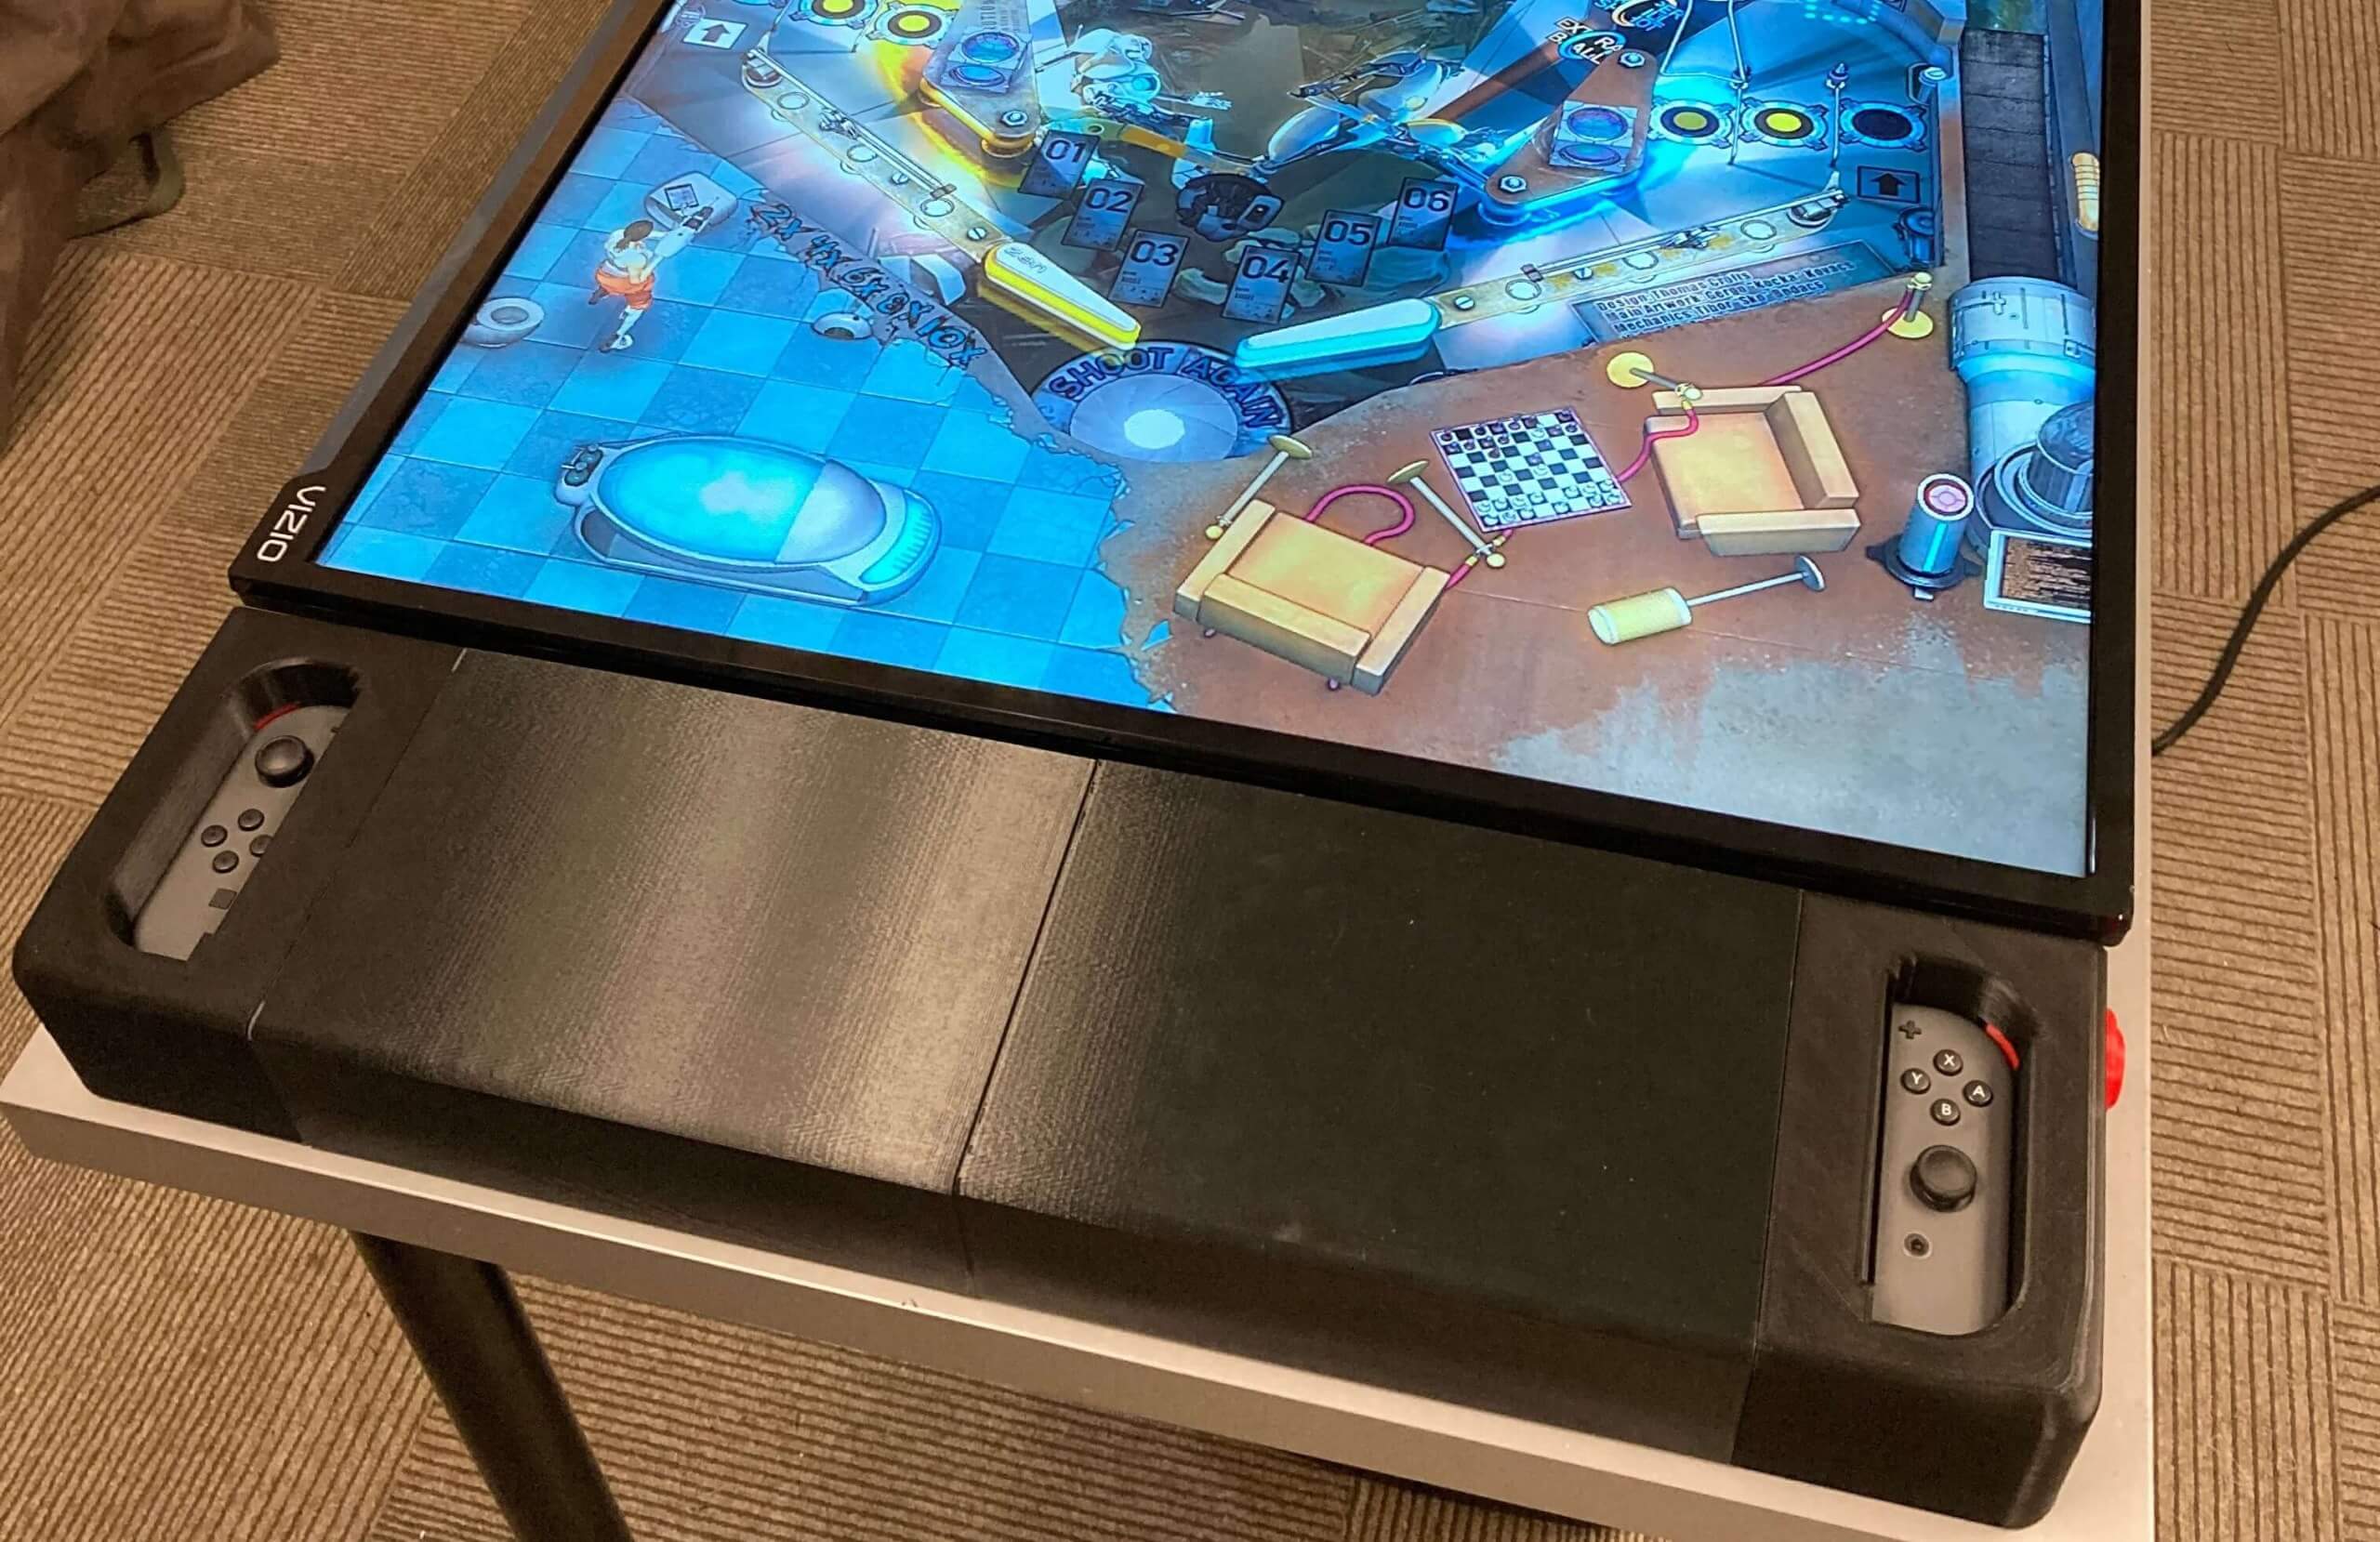 This 3D-printed gadget turns your Switch into a stand-up pinball machine